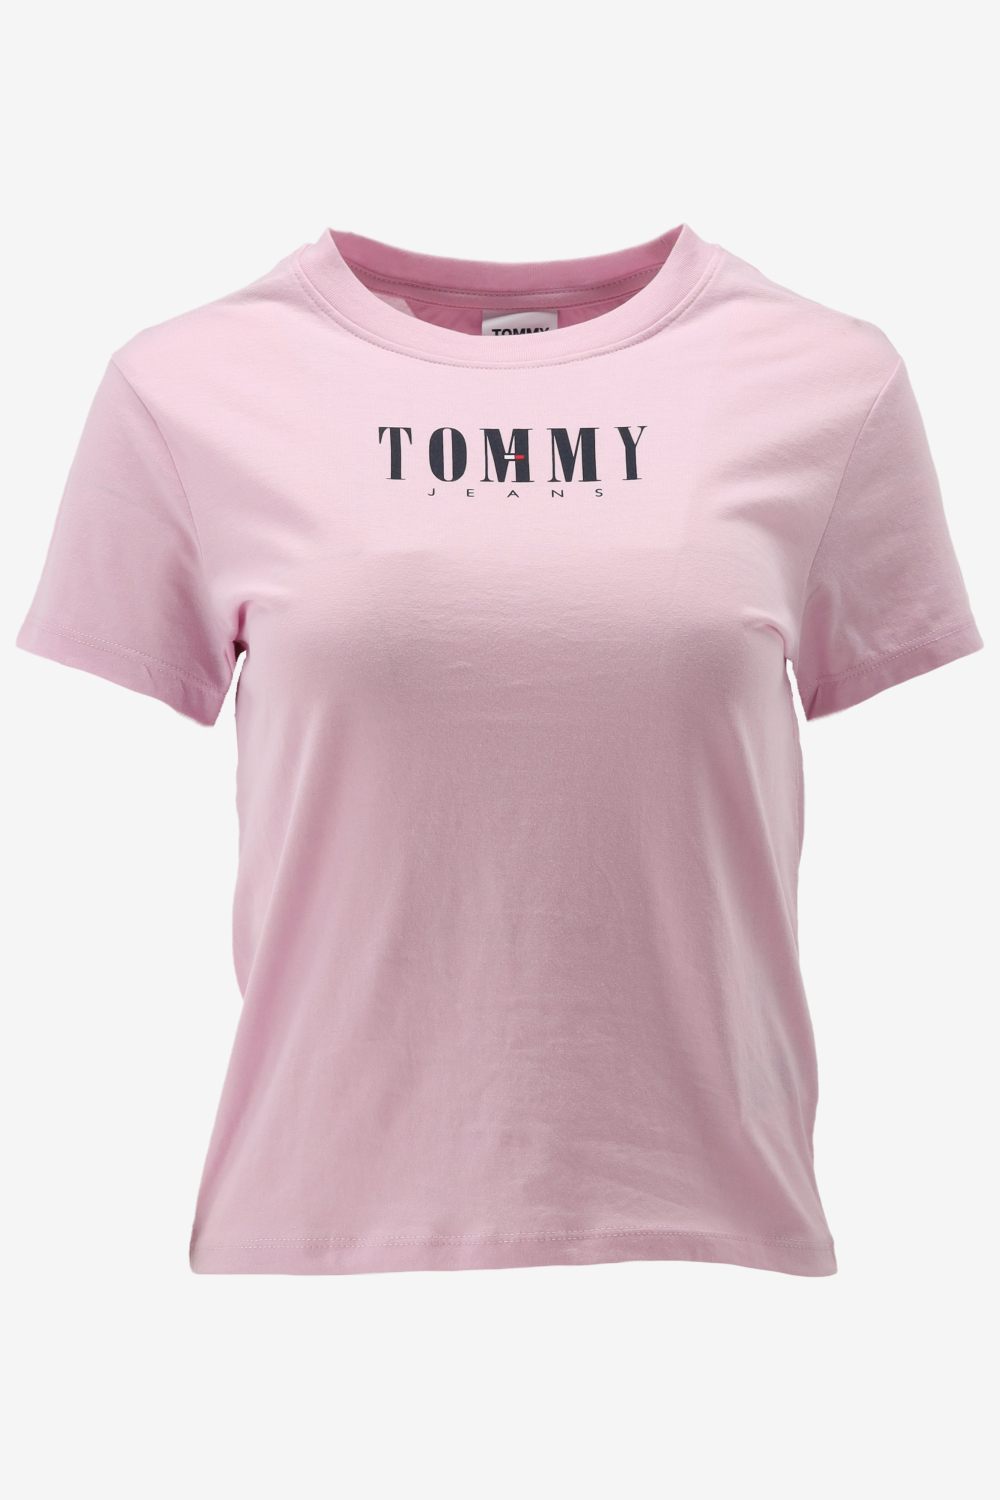 Tommy Hilfiger TJW BABY ESSENTIAL LOGO 2 SS Dames T-Shirt - Roze - Maat S